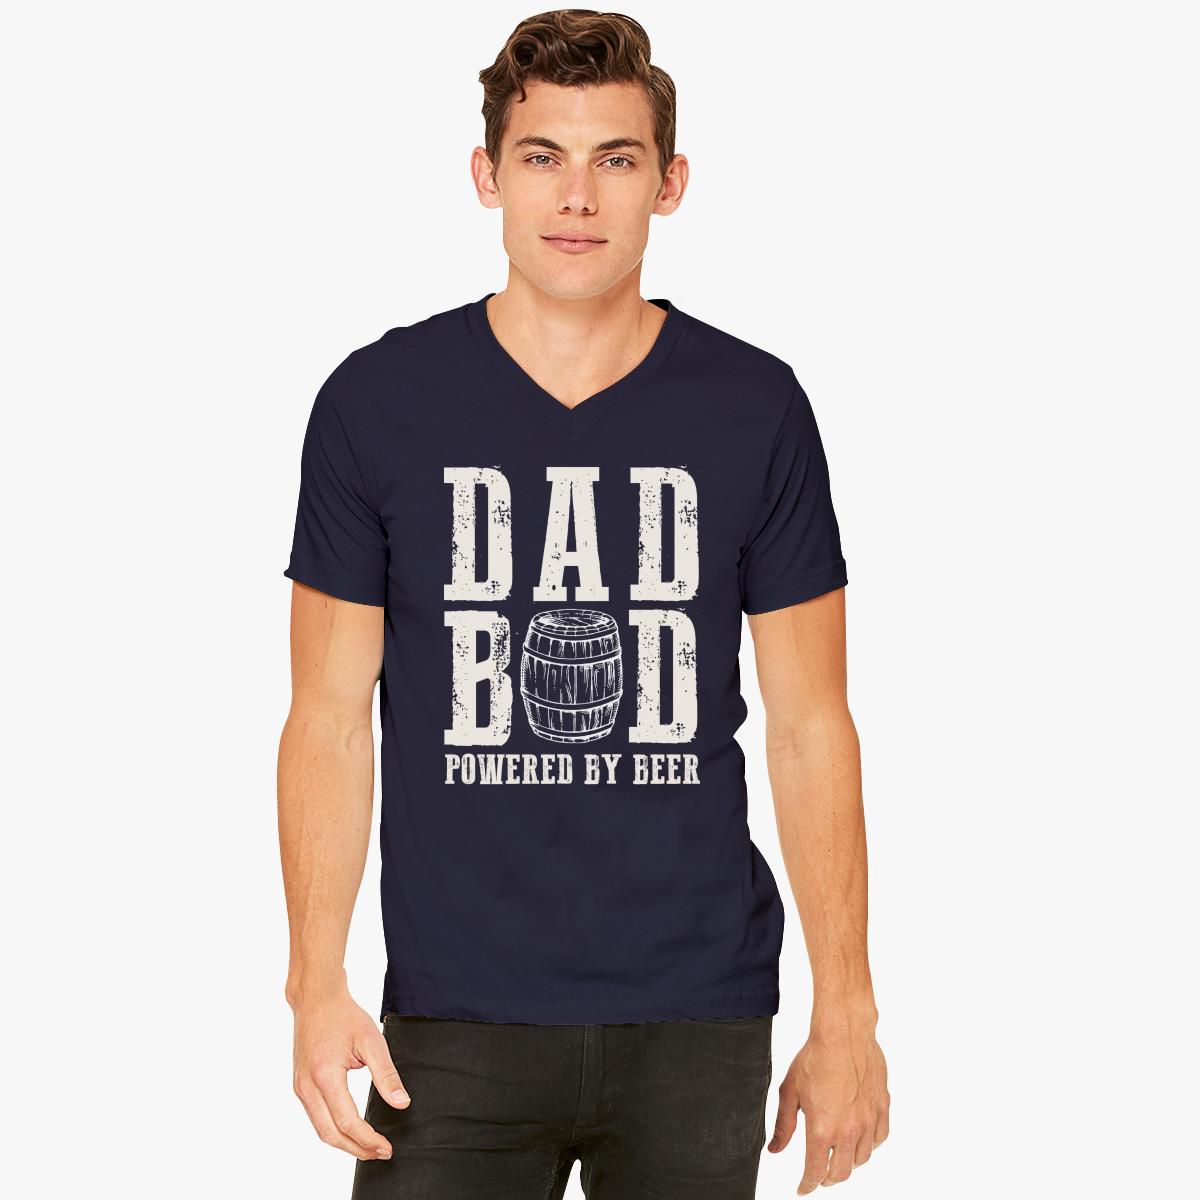 Download Dad Bod - Dad Bod Powered By Beer - Funny Fathers Day V ...